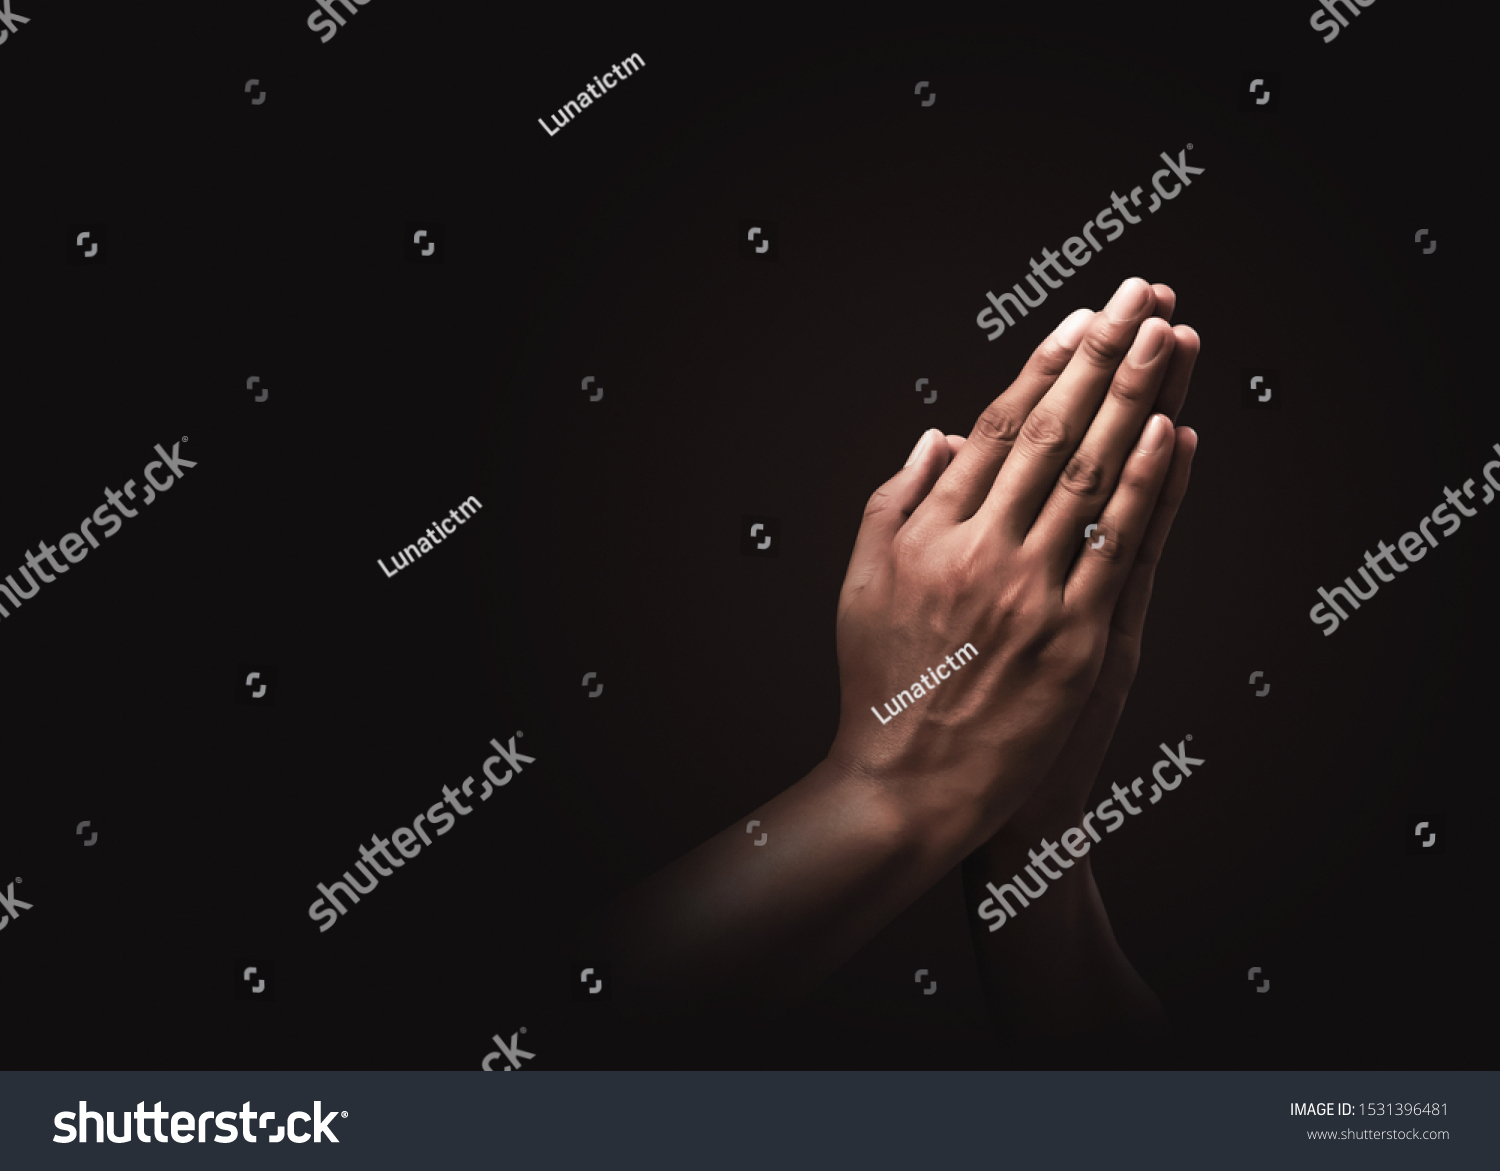 Praying hands with faith in religion and belief in God on dark background. Power of hope or love and devotion. Namaste or Namaskar hands gesture. Prayer position.